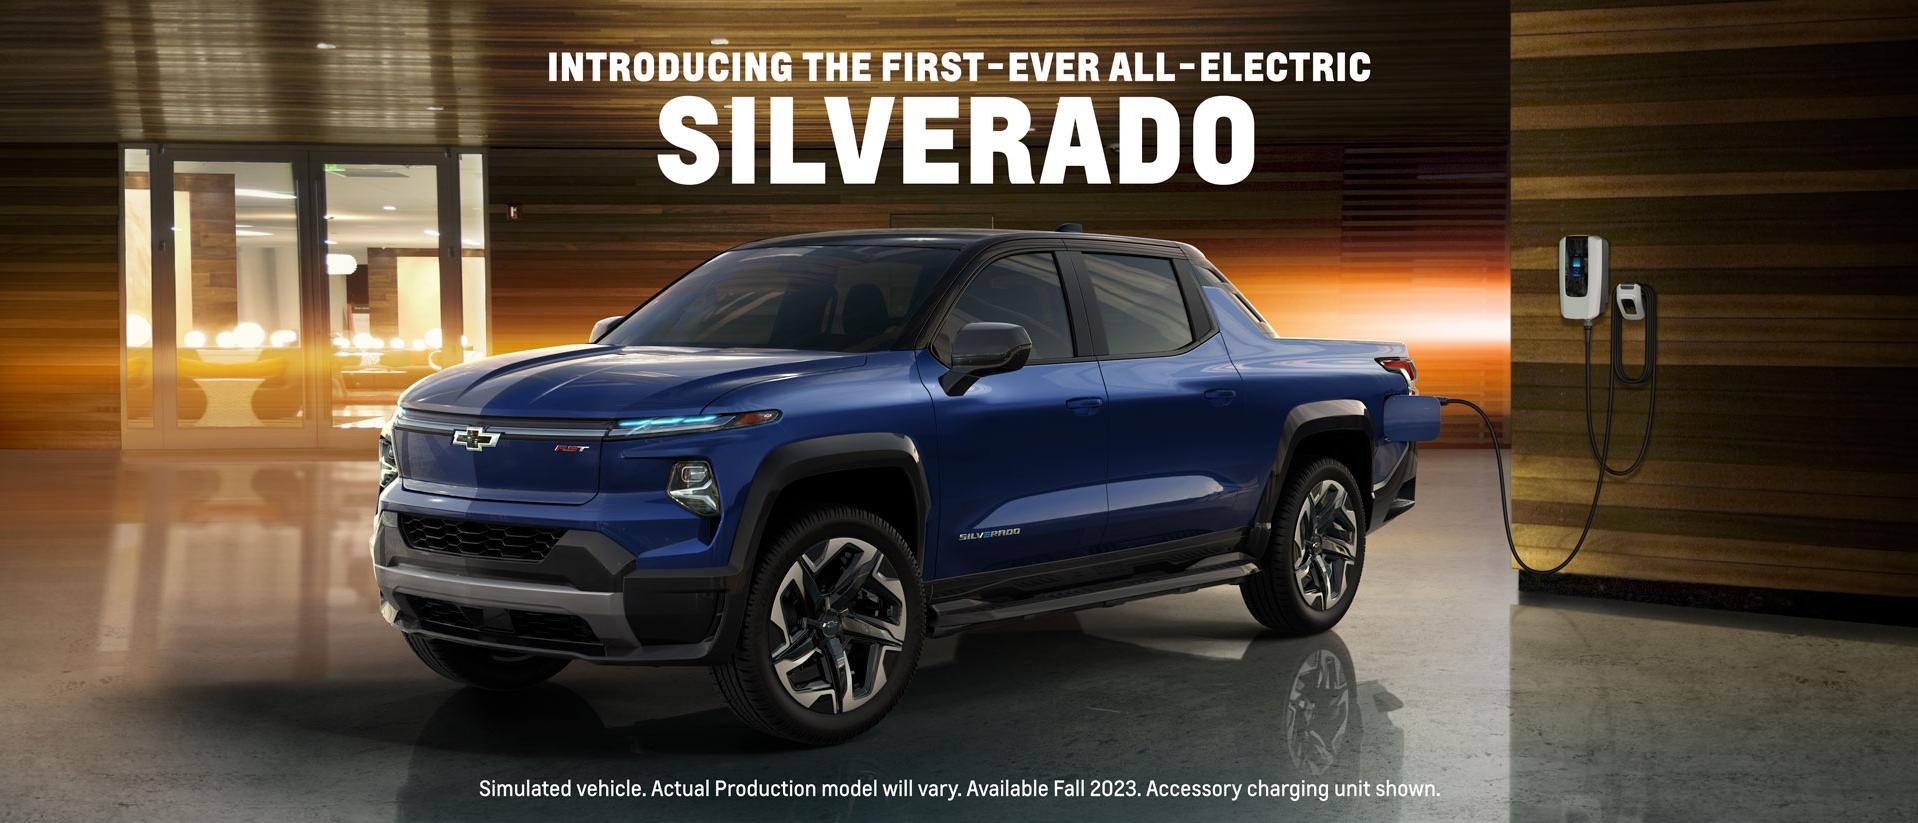 INTRODUCING THE FIRST-EVER ALL-ELECTRIC SILVERADO